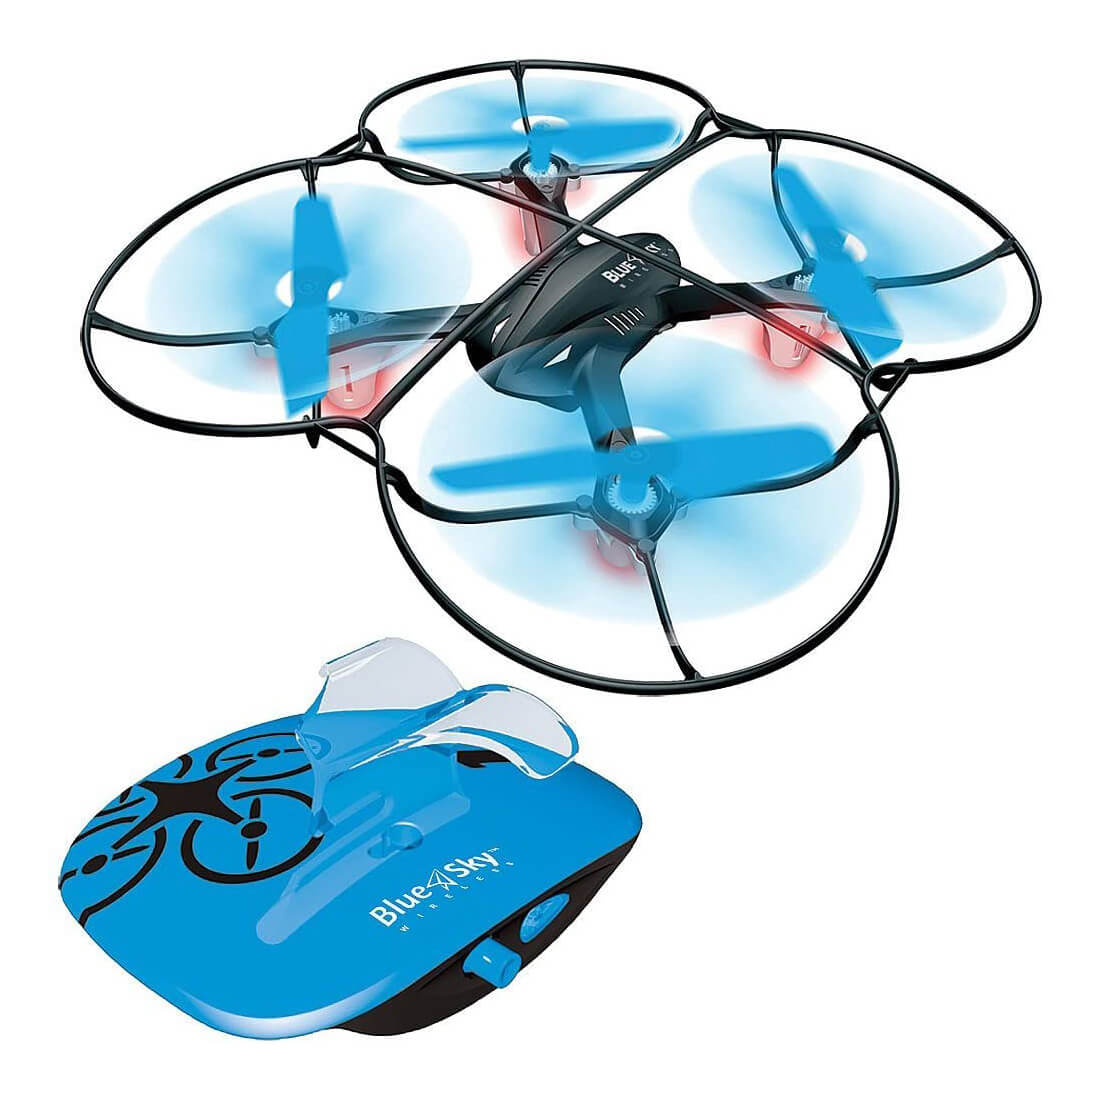 X-Force Hand Controlled Drone